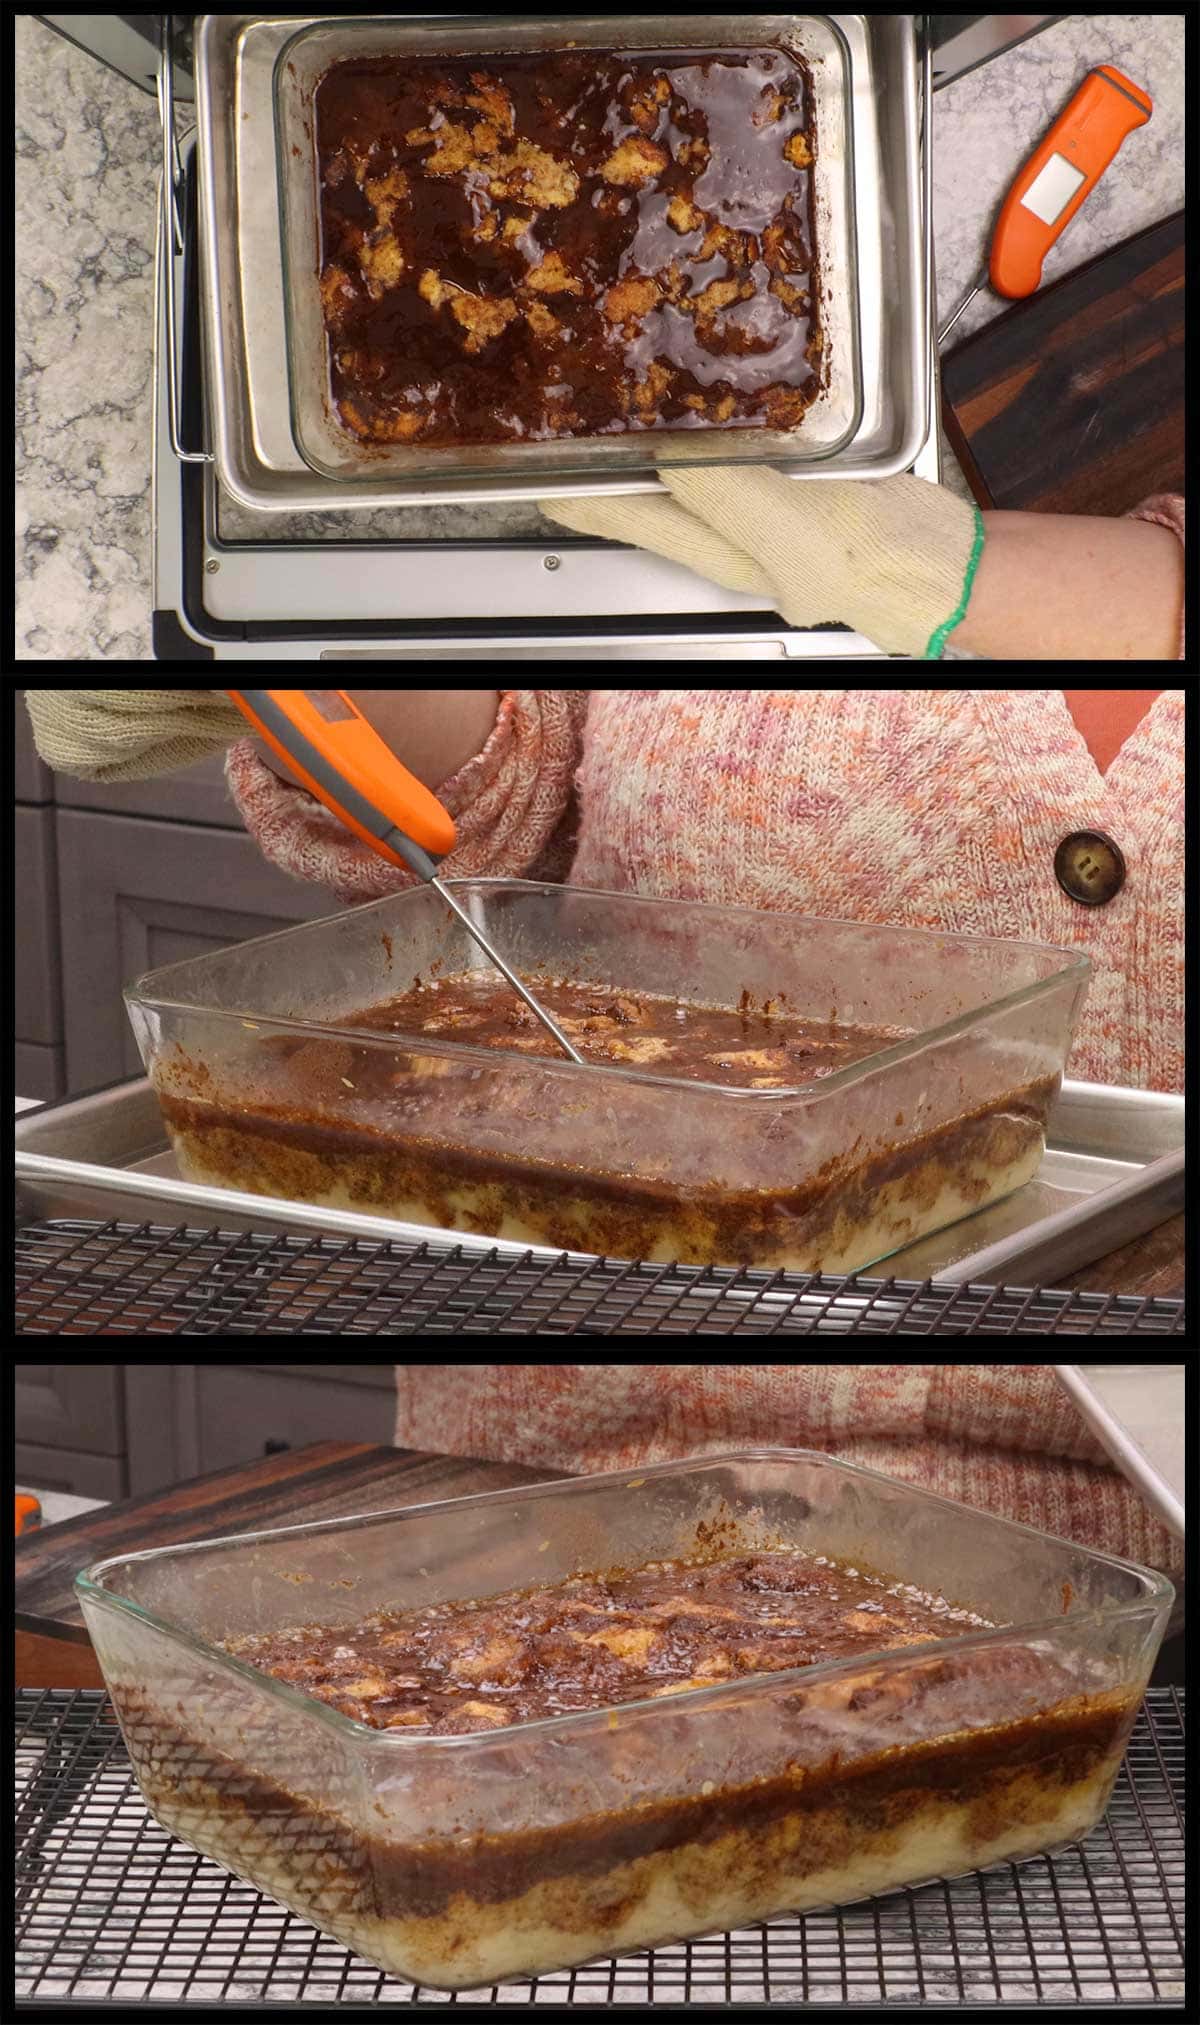 REmoving the baking pan with bread pudding and cooling on a rack